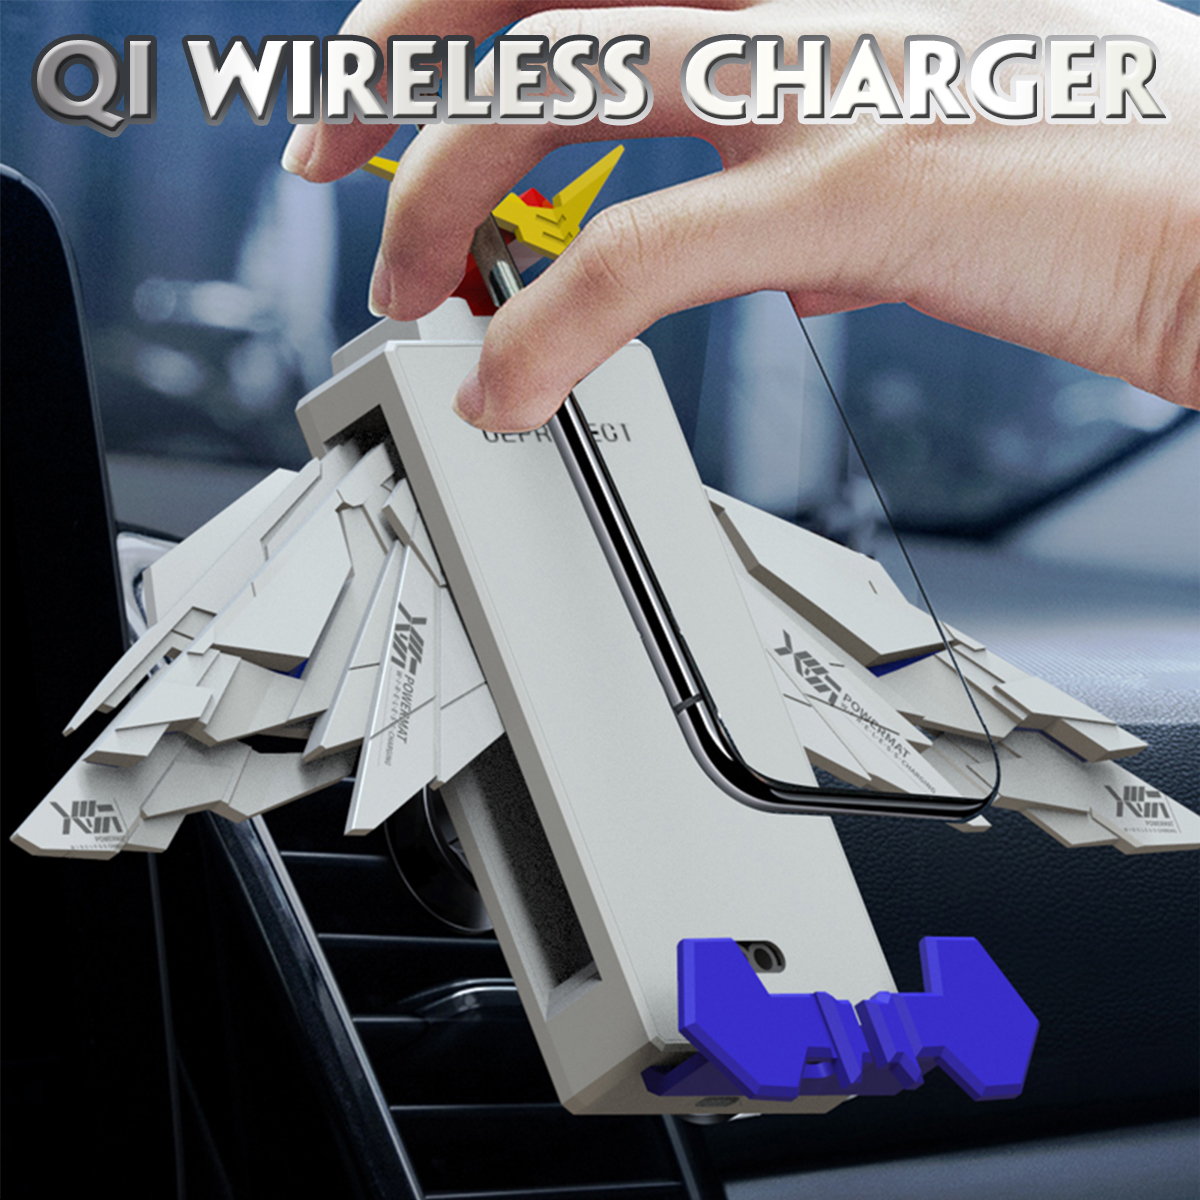 Bakeey-Wings-Folding-Qi-Wireless-Charger-Slim-Charge-Pad-For-Samsung-Note-8-S8-iPhone-X-8-Plus-1585437-1